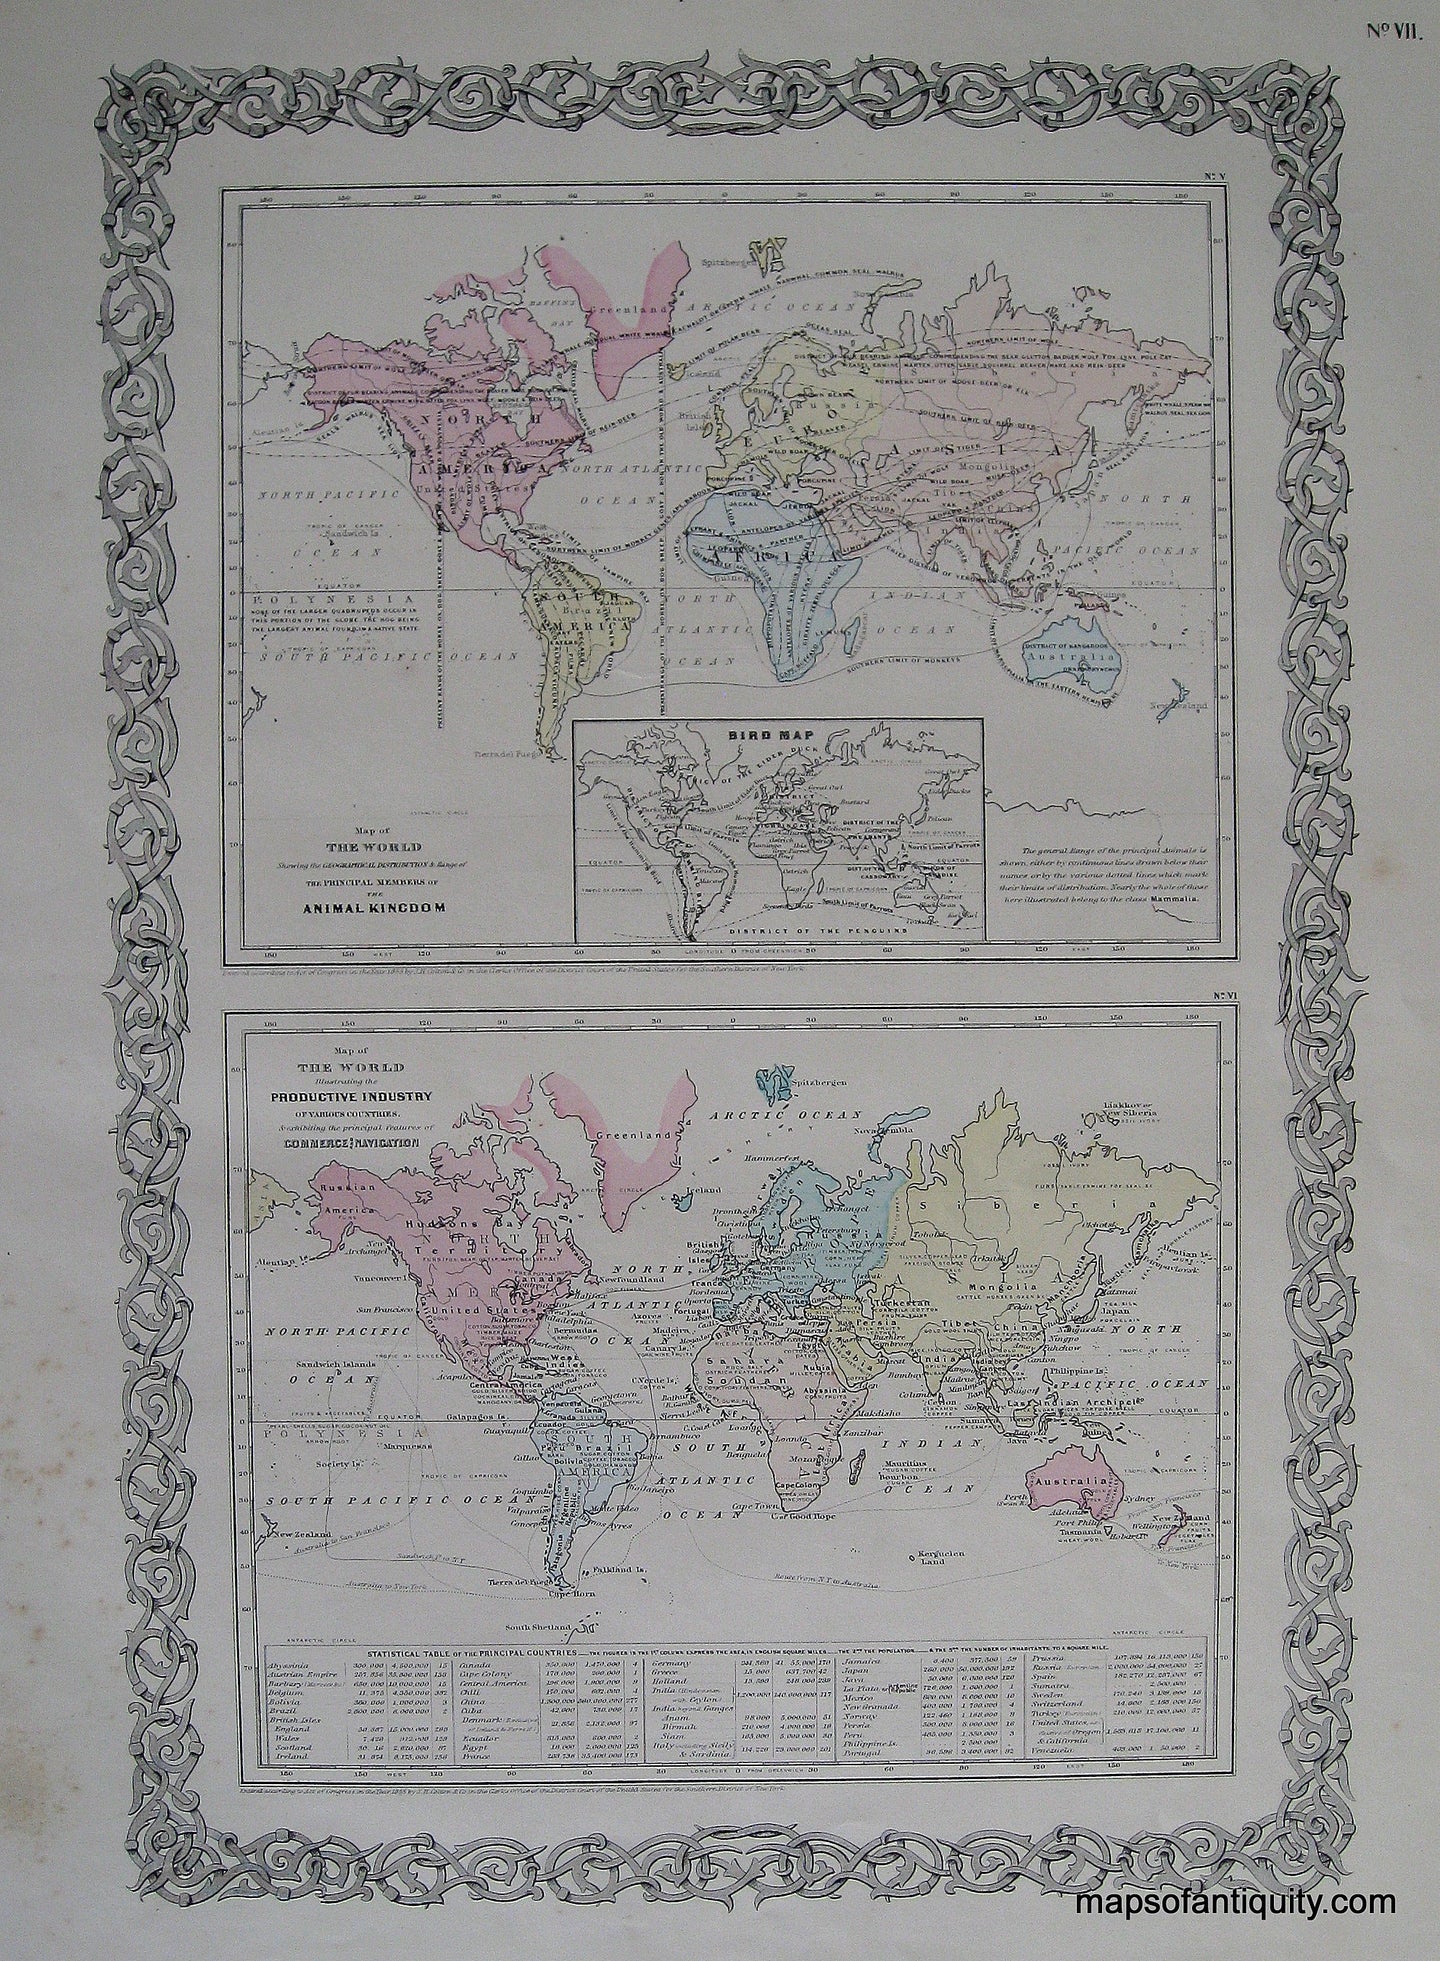 Antique-Hand-Colored-Map-World-Distribution-Map-of-the-Animal-Kingdom-the-Productive-Industry-of-Various-Countries-1856-Colton-Maps-Of-Antiquity